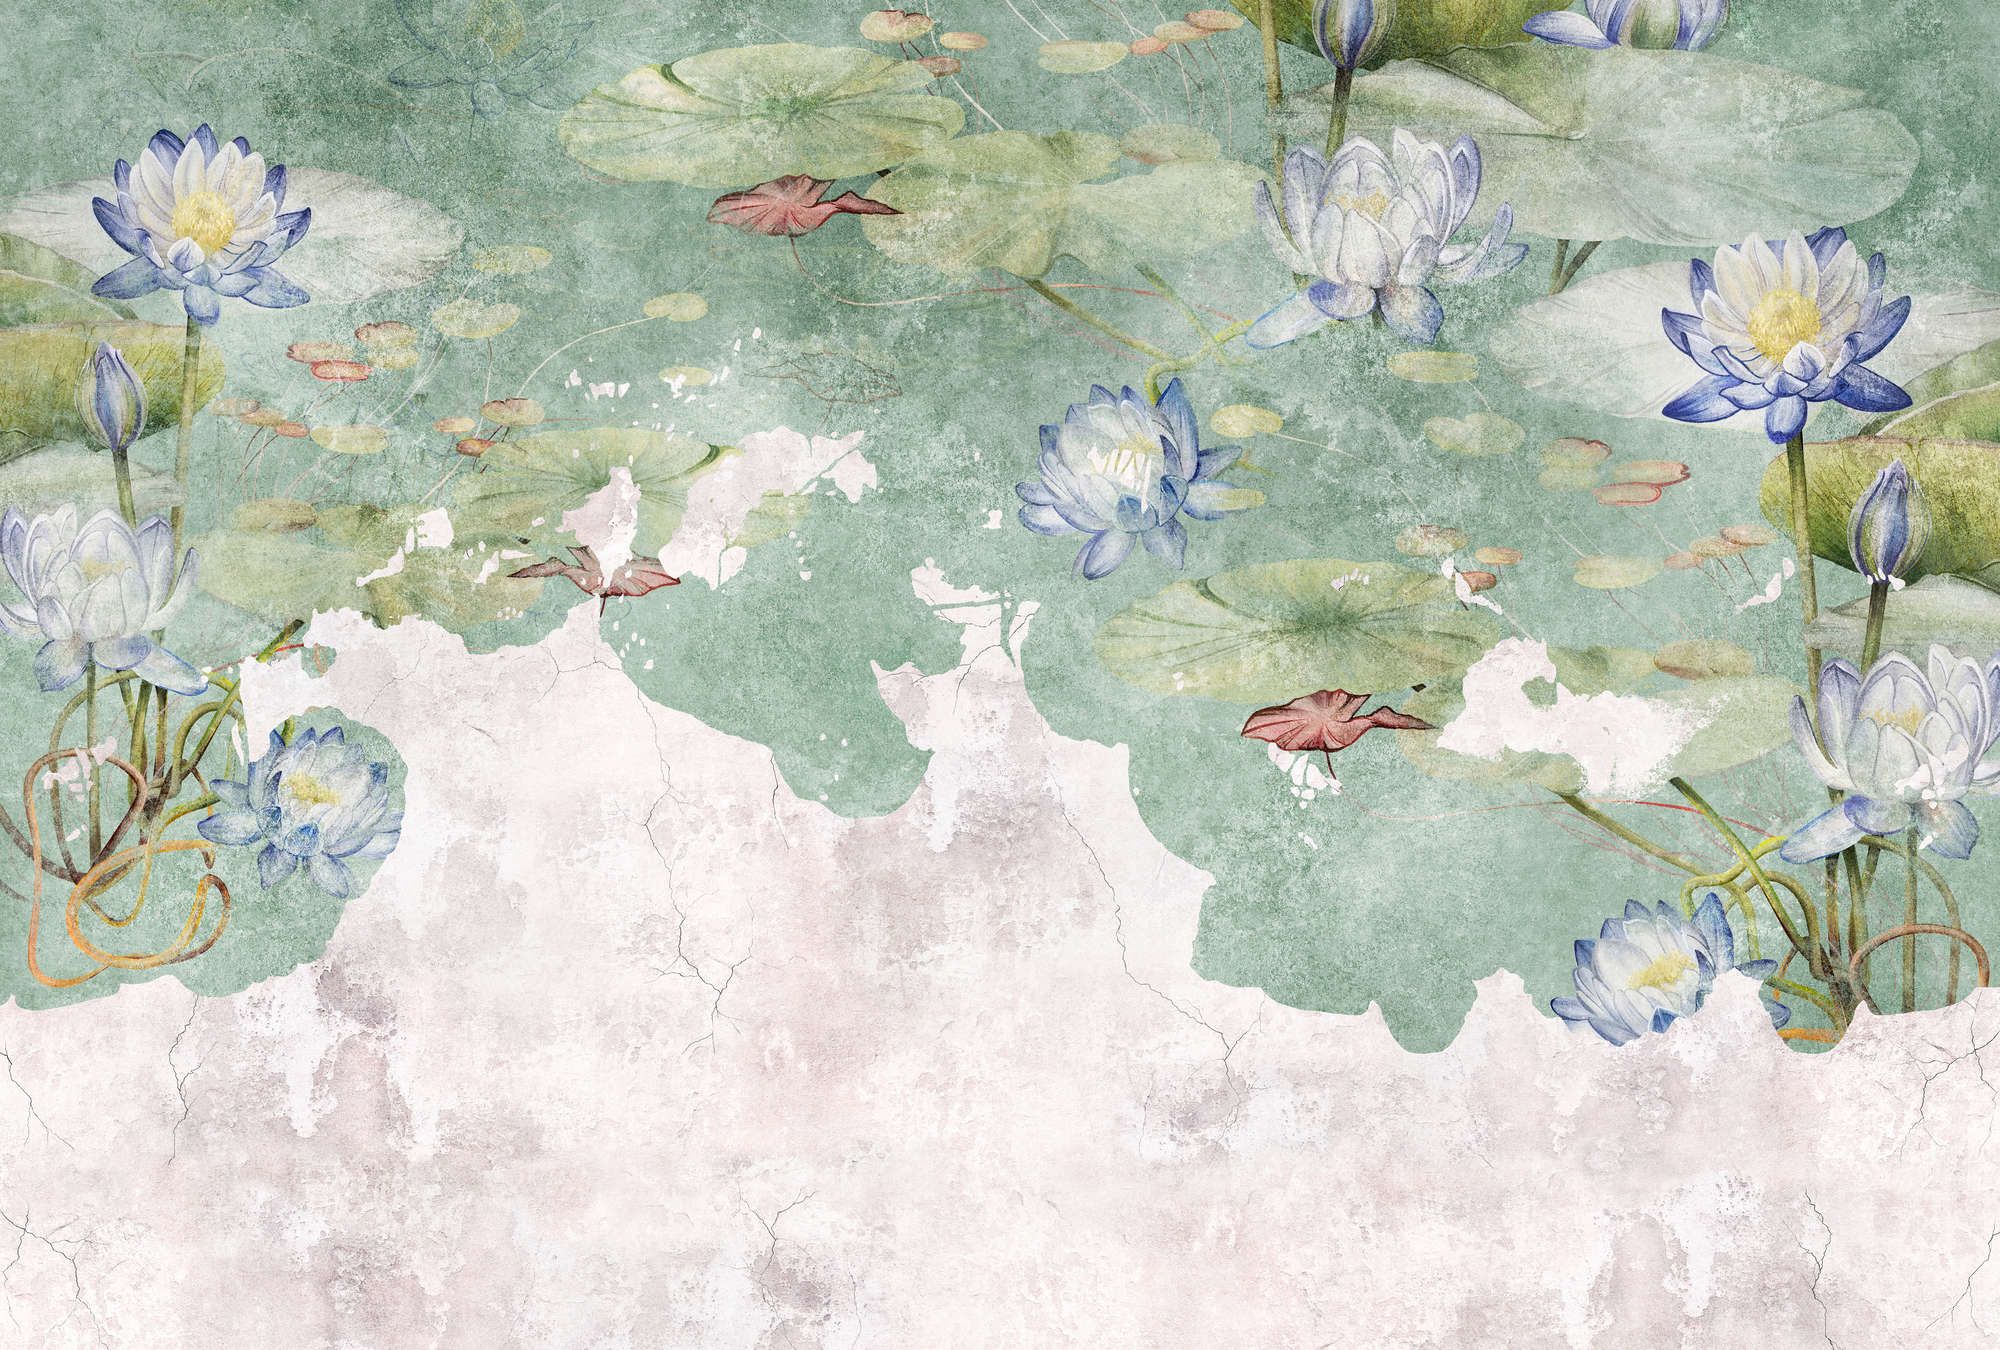             Photo wallpaper »lily« - Water lilies on vintage plaster texture in the background - Smooth, slightly shiny premium non-woven fabric
        